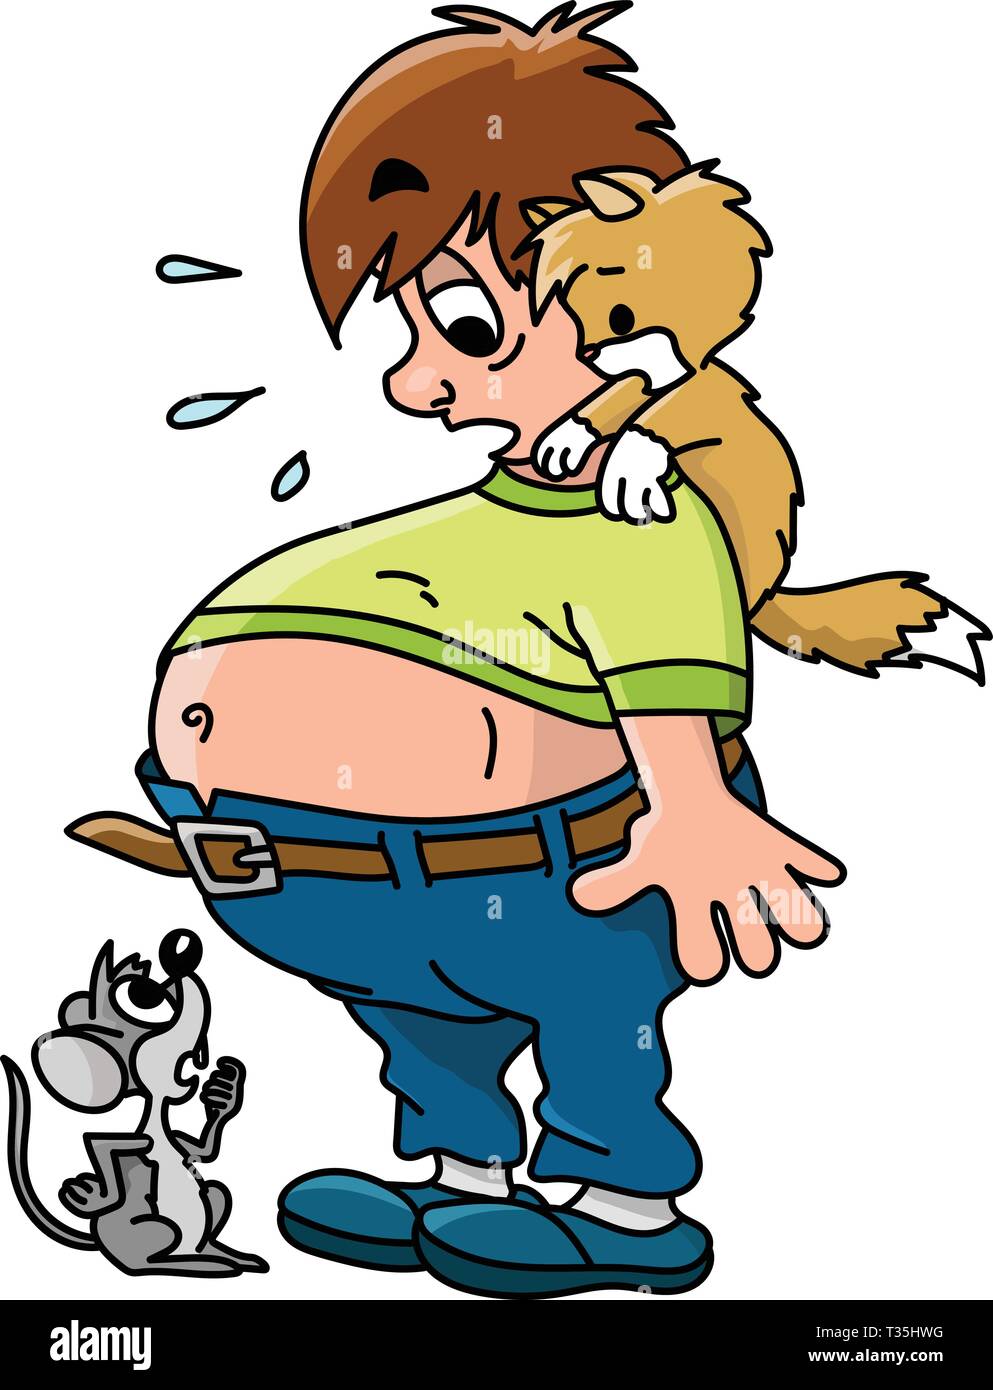 Cartoon man gained too much weight looking at his tummy with his pet friends vector illustration Stock Vector